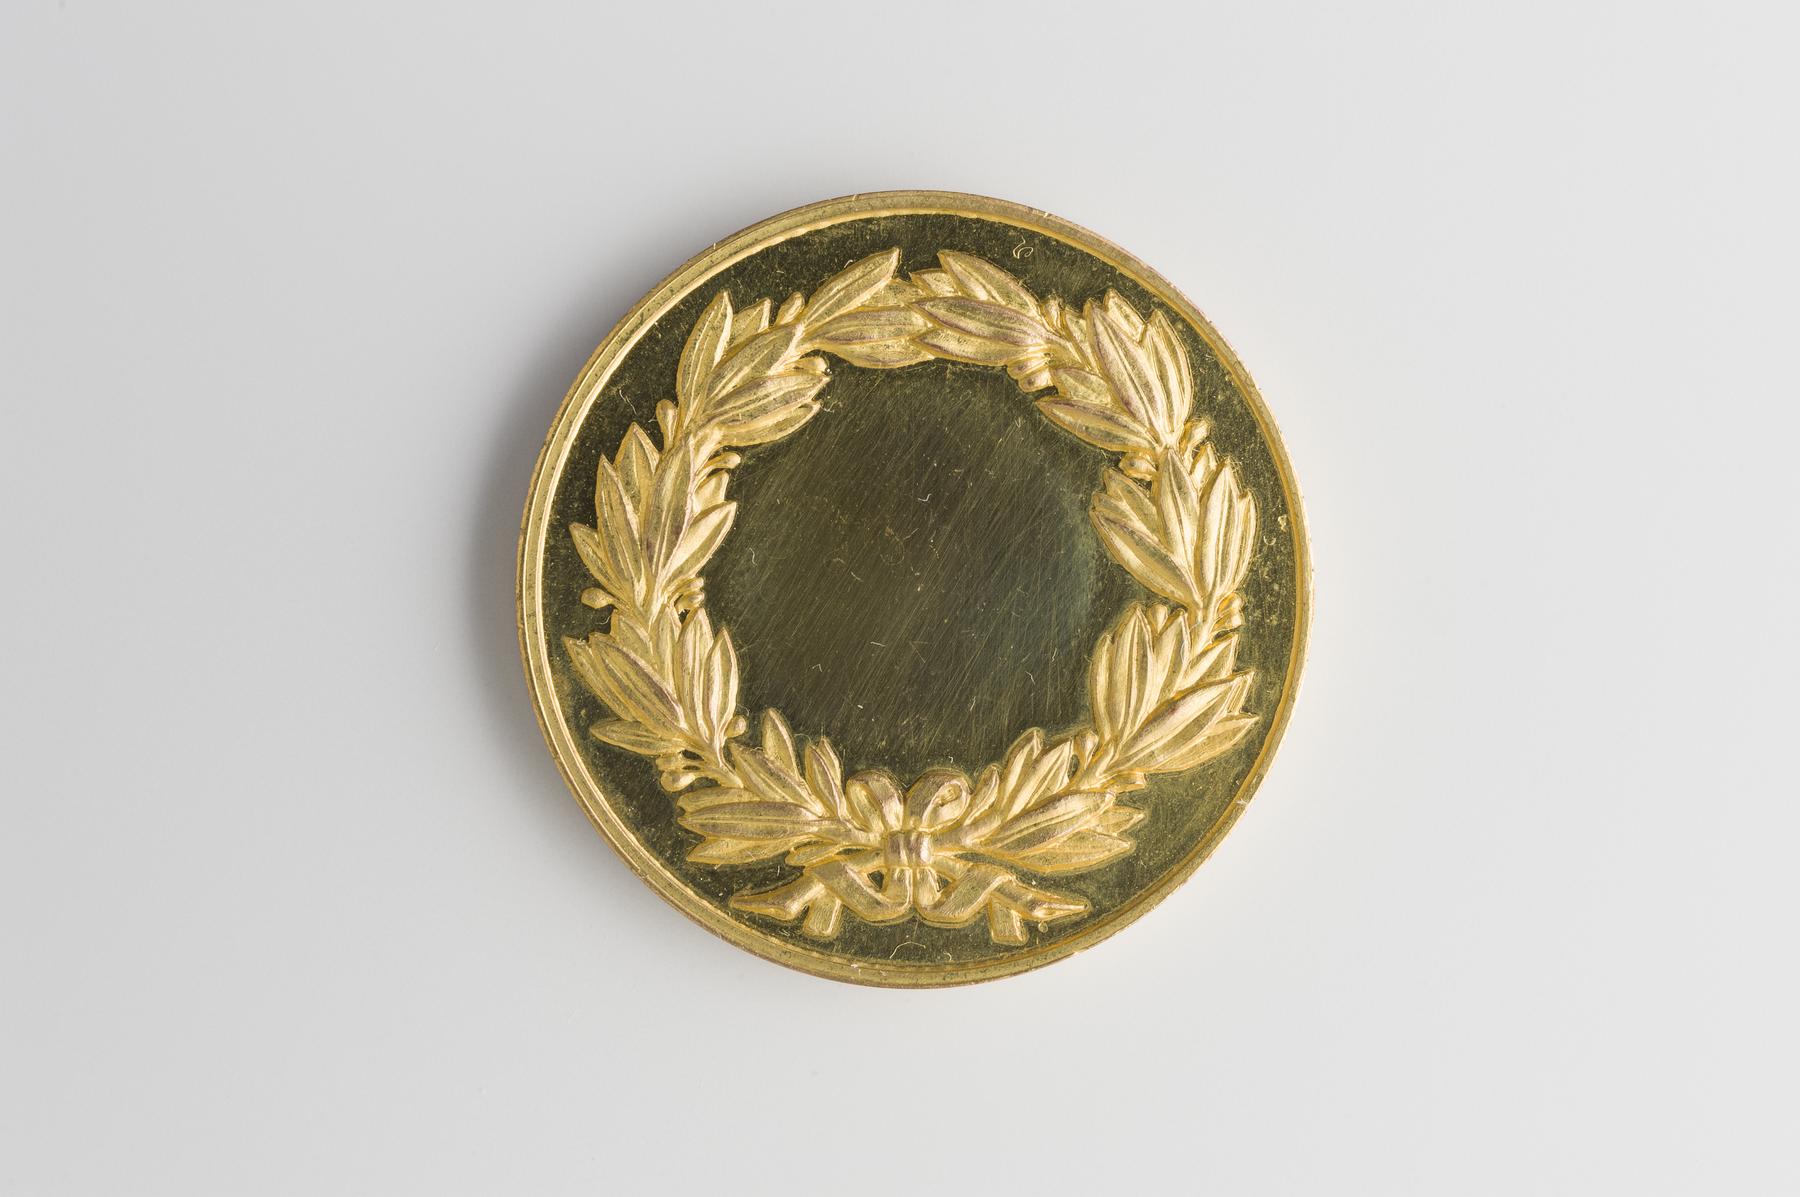 Concours musical des Lilas (Seine), 1872, ND11415 - a gold medal with a laurel design